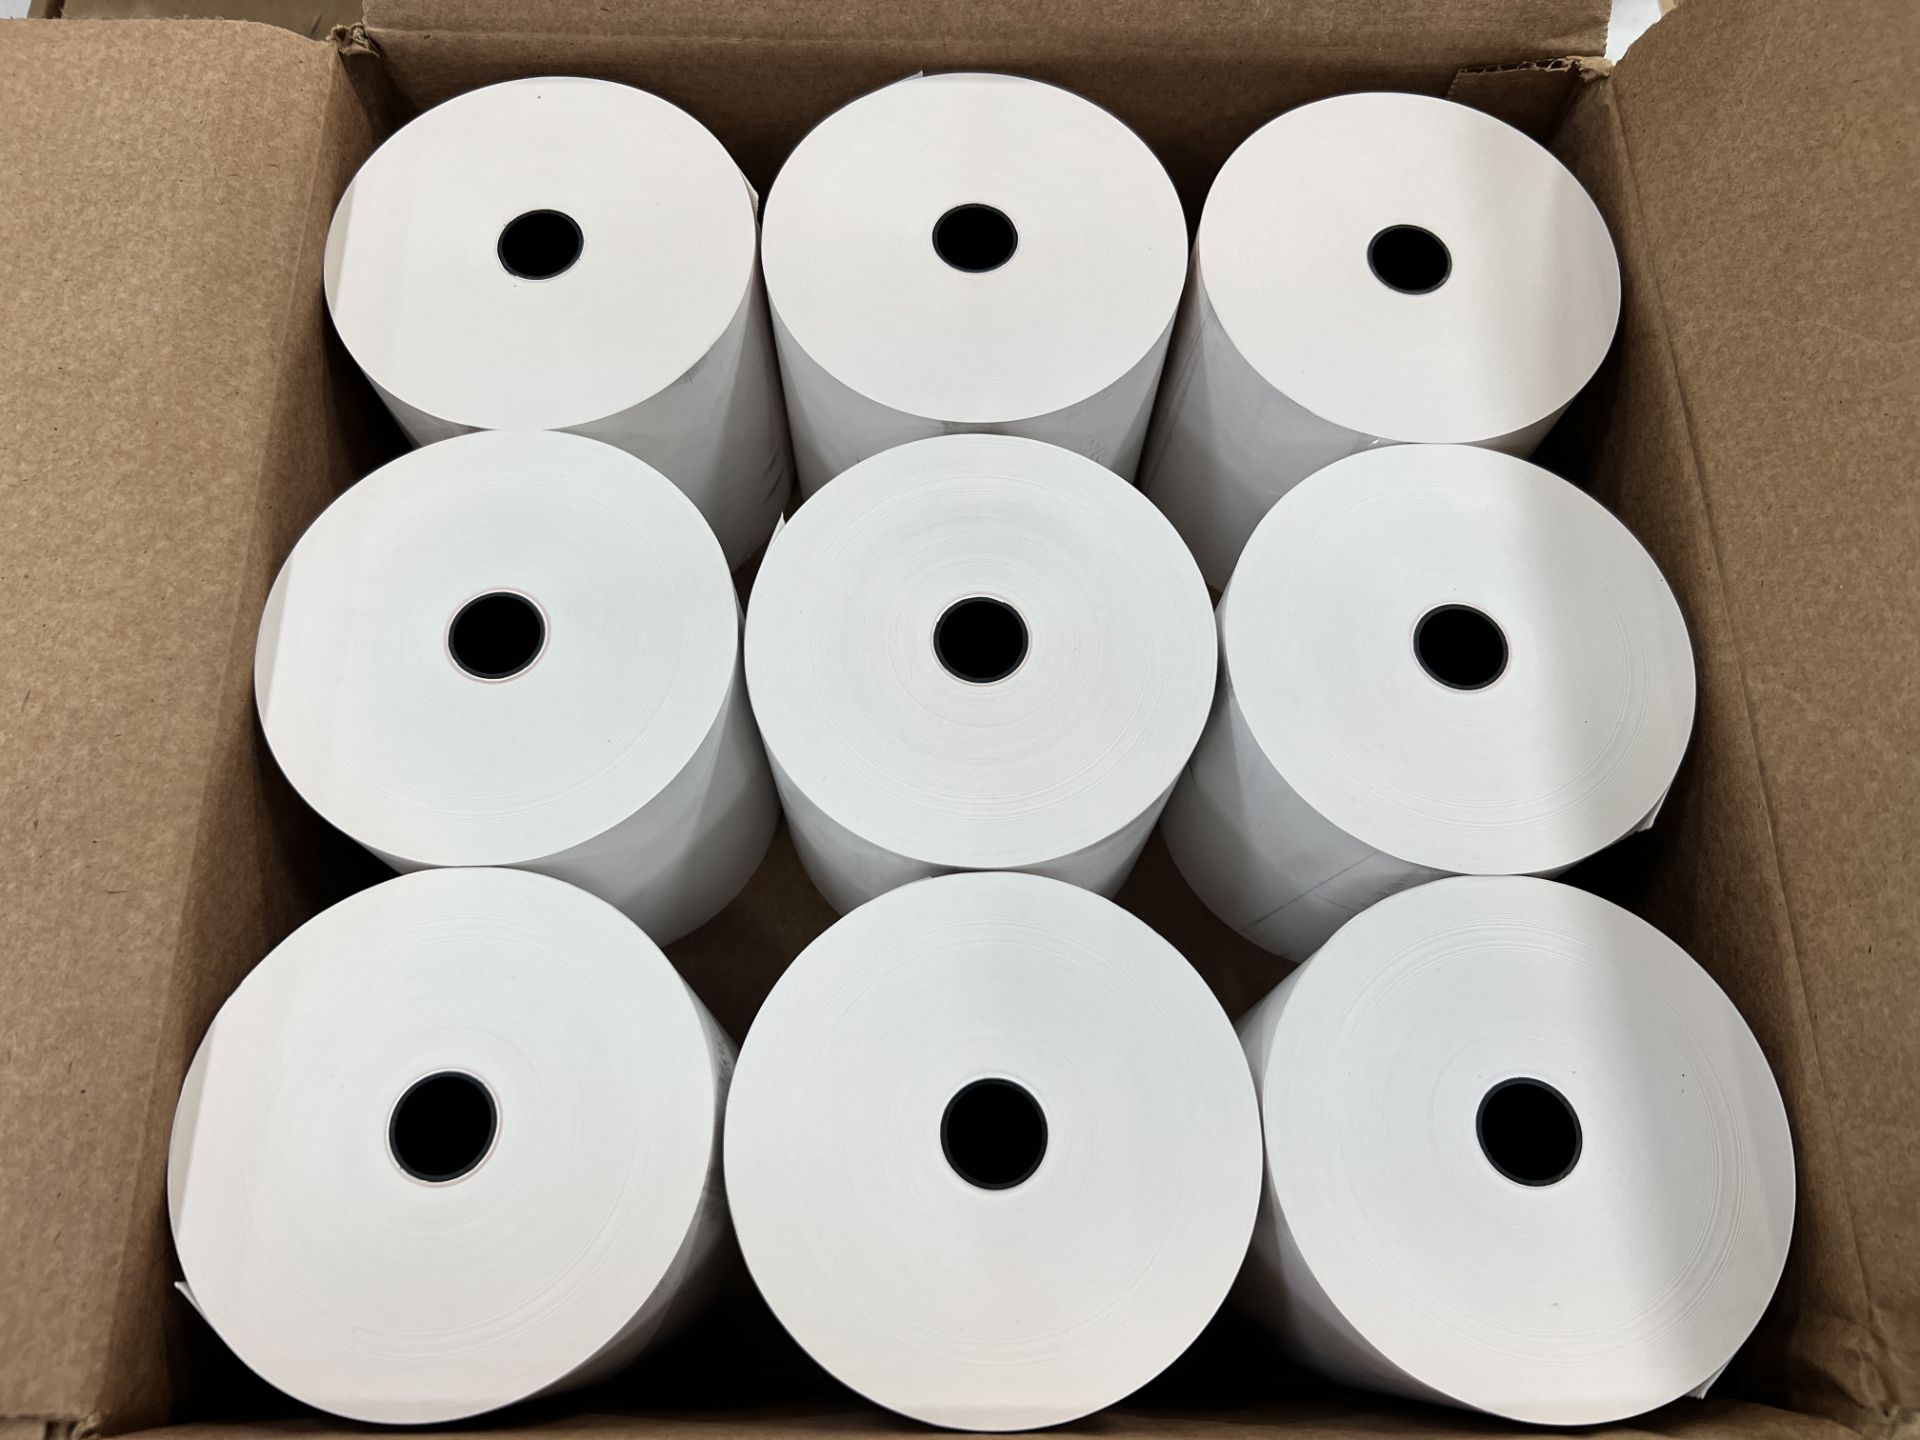 Thermal Receipt Paper 4" x 574' - Image 2 of 4